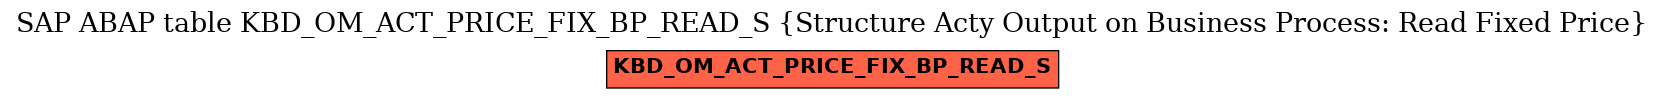 E-R Diagram for table KBD_OM_ACT_PRICE_FIX_BP_READ_S (Structure Acty Output on Business Process: Read Fixed Price)